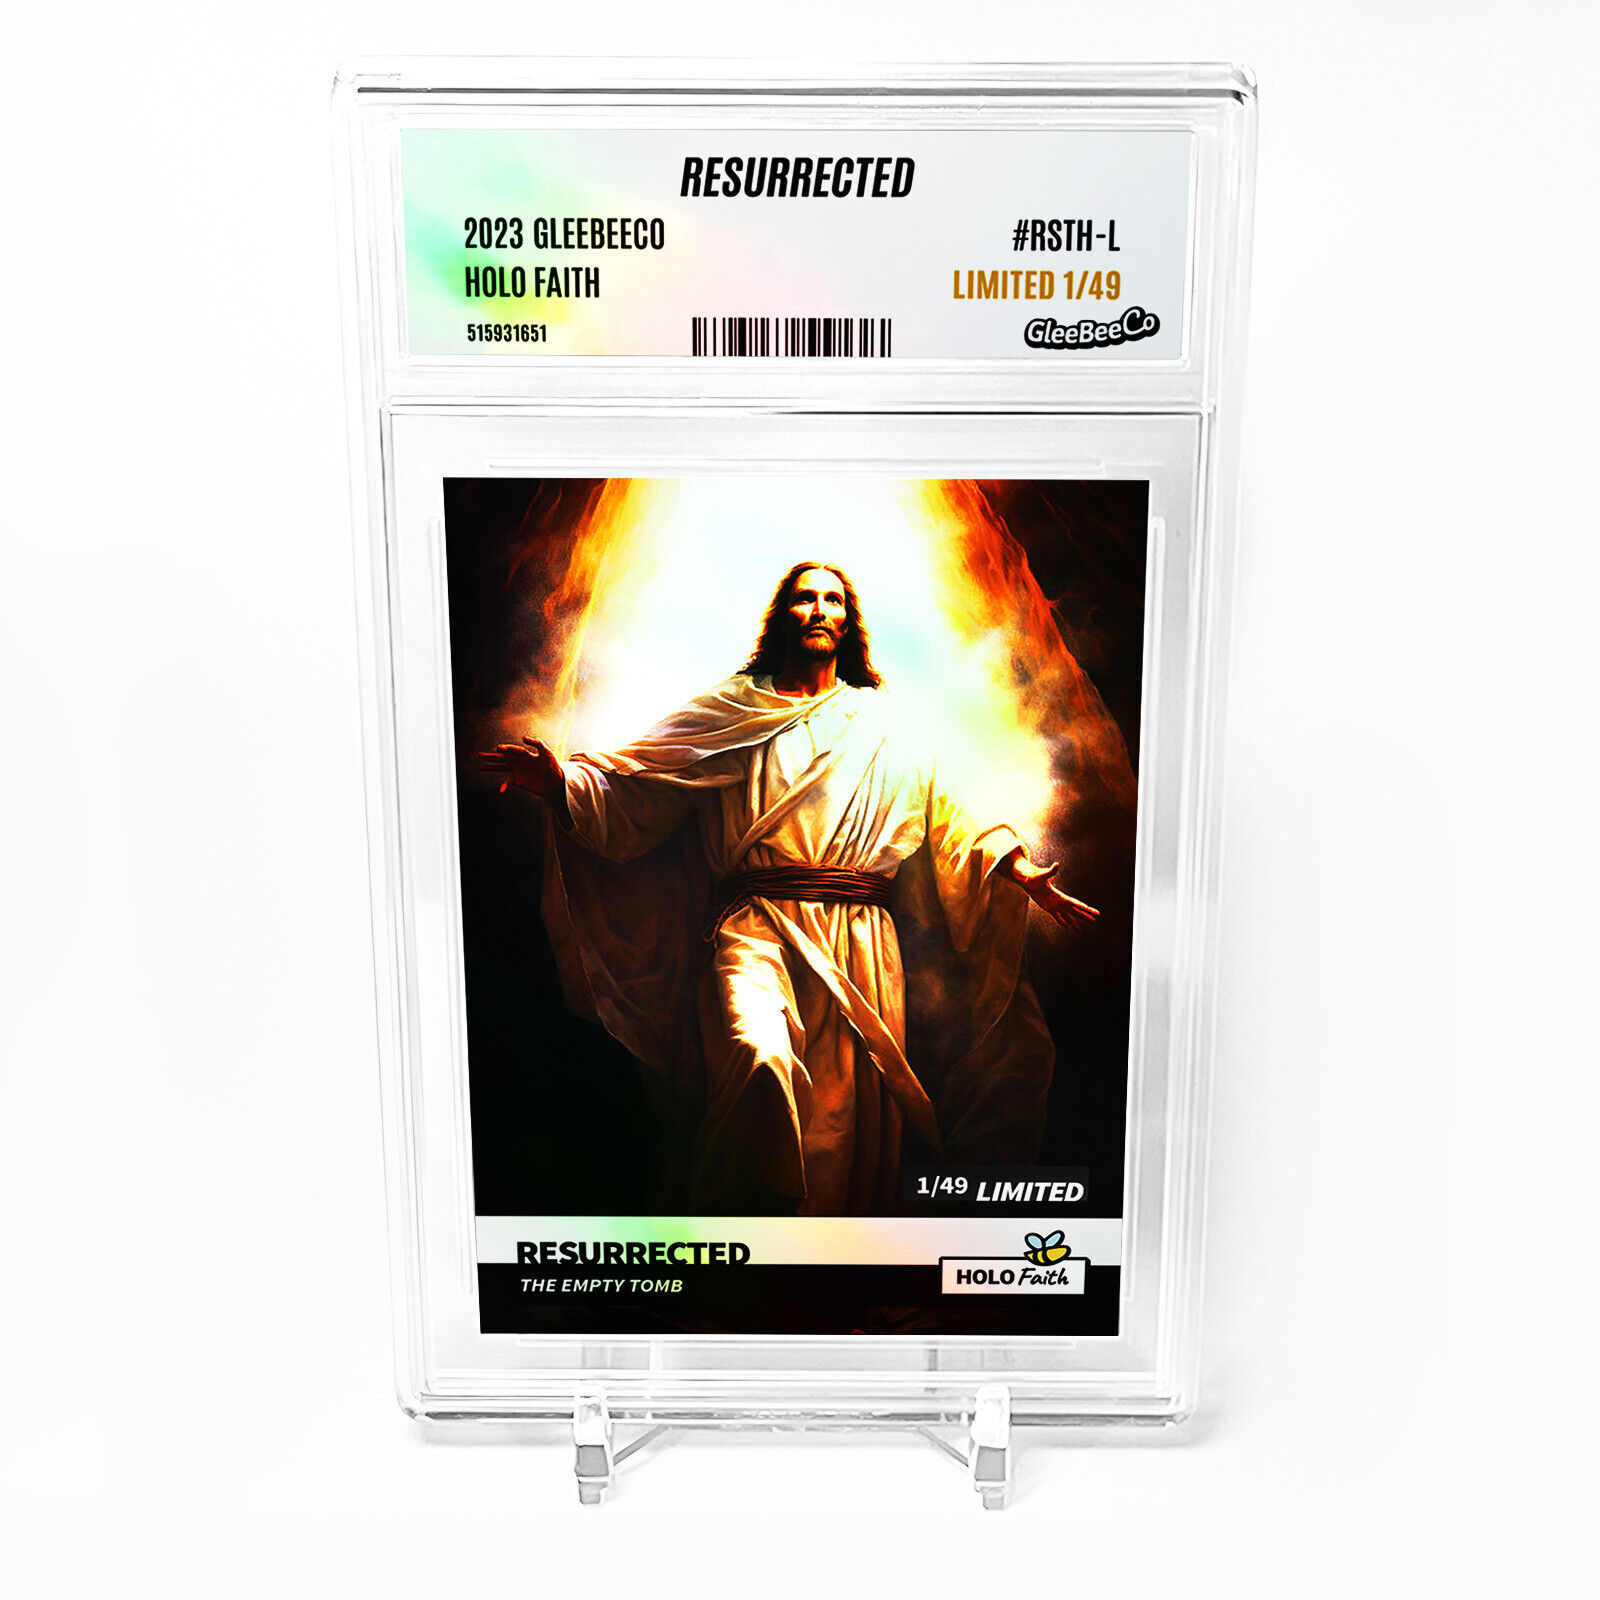 RESURRECTED Holographic Card 2023 GleeBeeCo Slabbed (Jesus) #RSTH-L Only /49